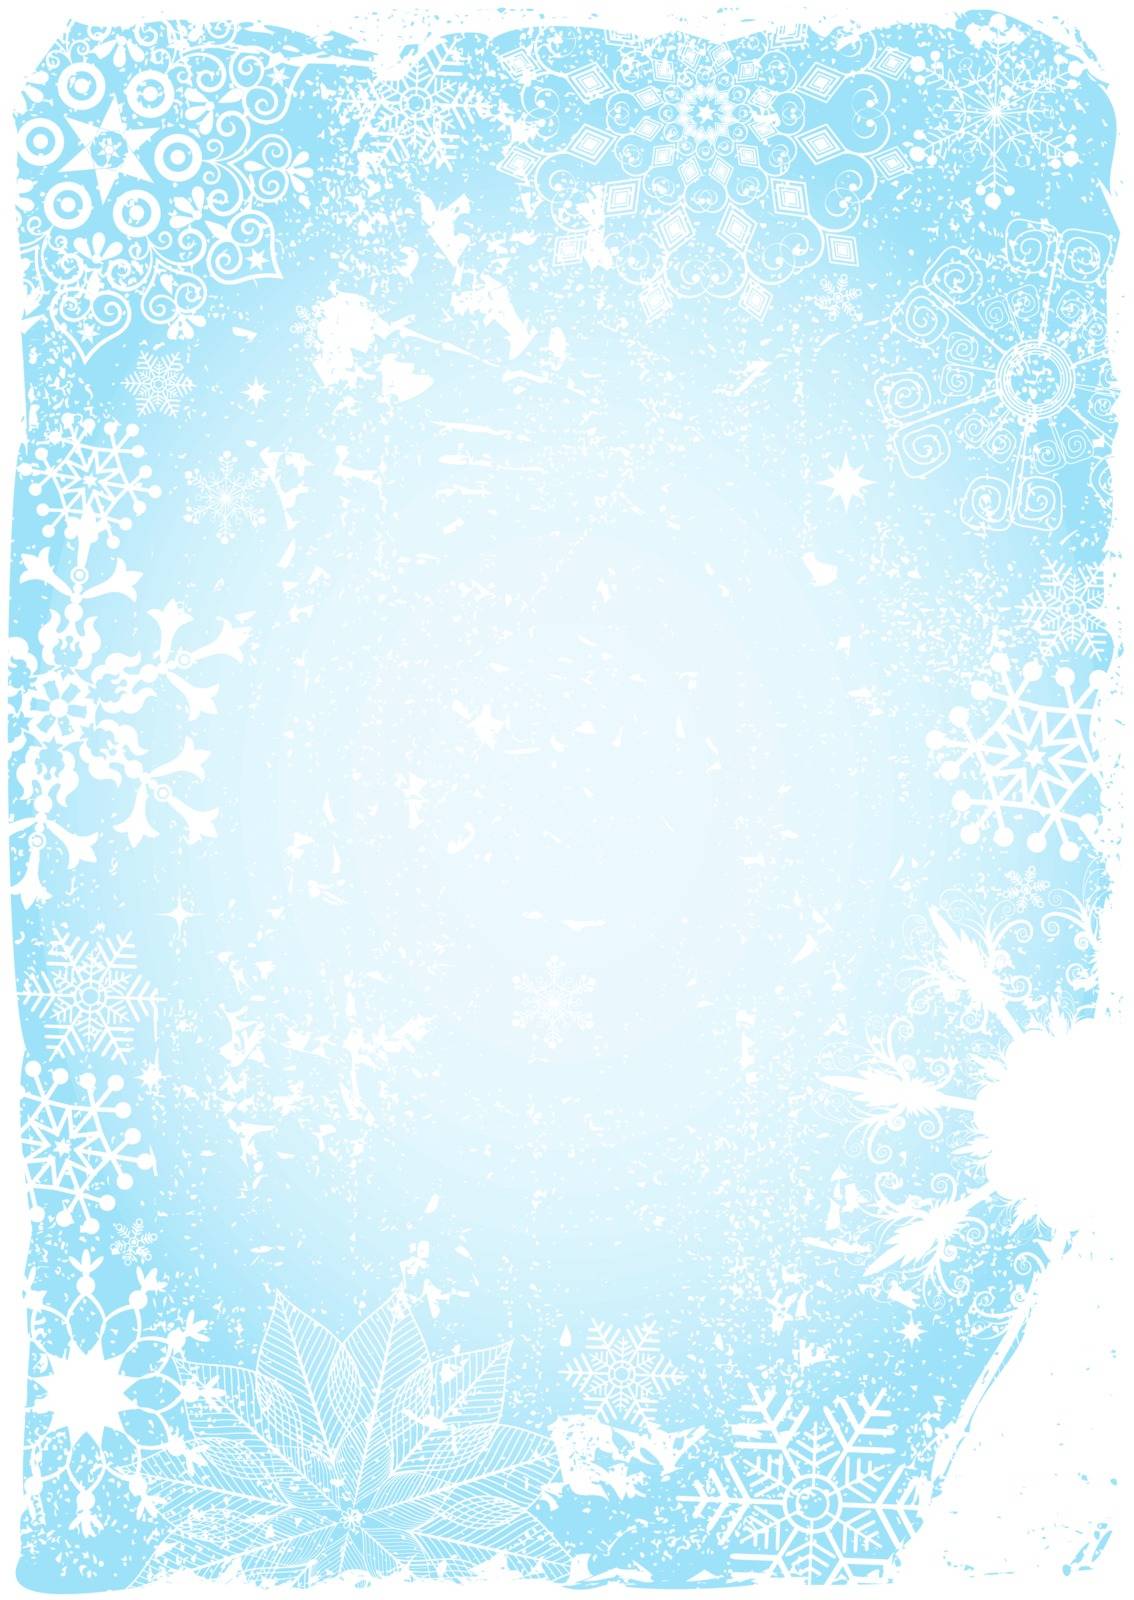 Blue grungy christmas card with snowflakes and spots (vector eps 10)